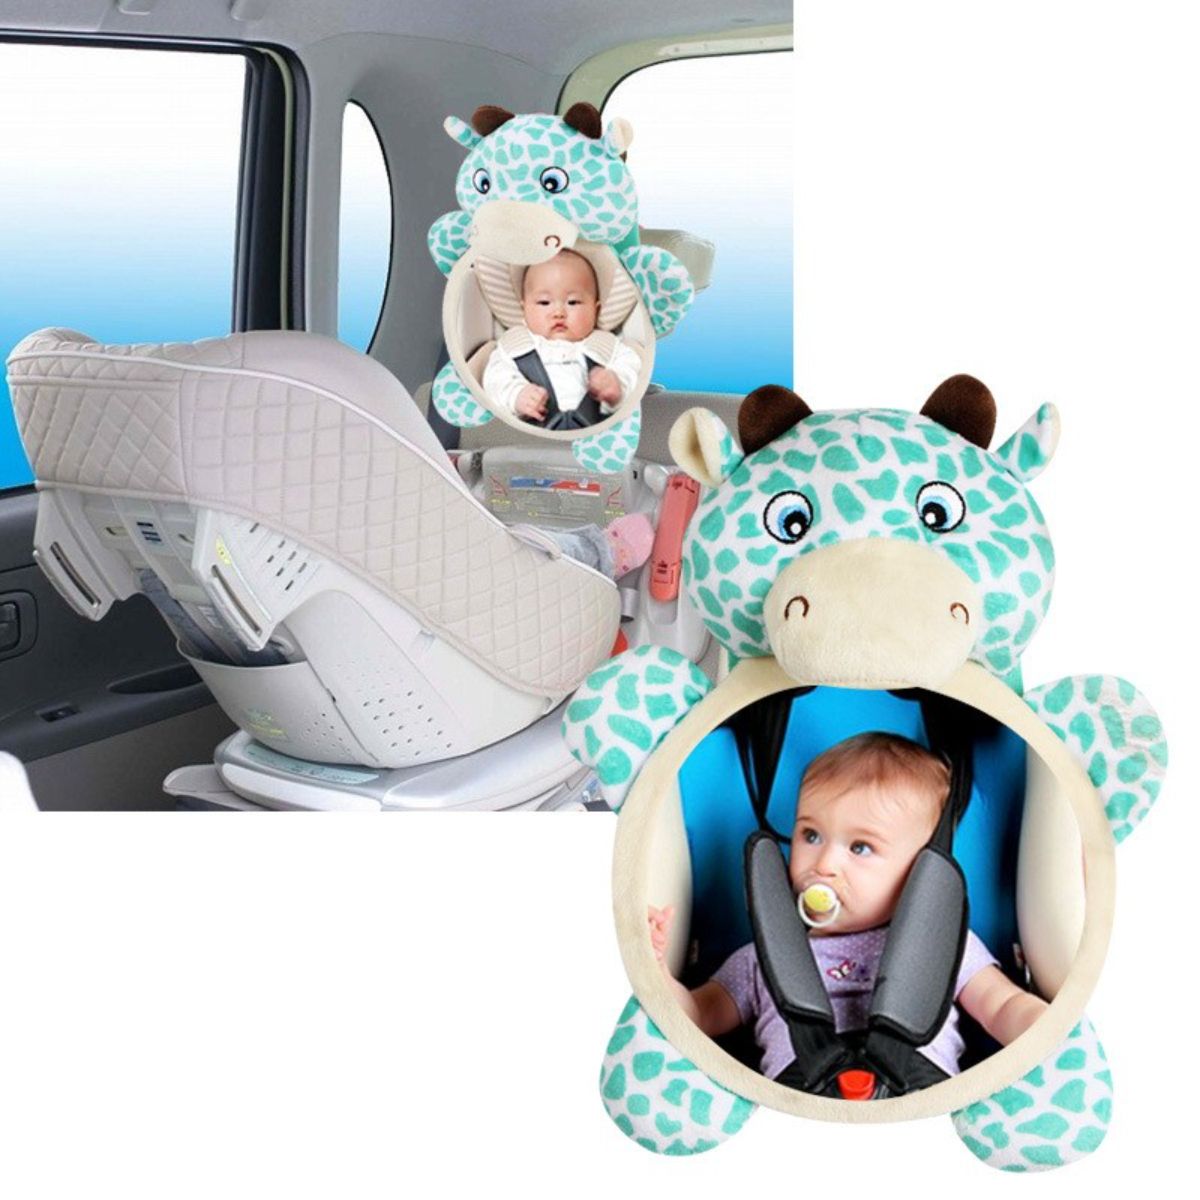 Riolio Baby Cartoon Animal Pattern Safety Car Seat MIRROR for Rear Facing Infant Wholesale